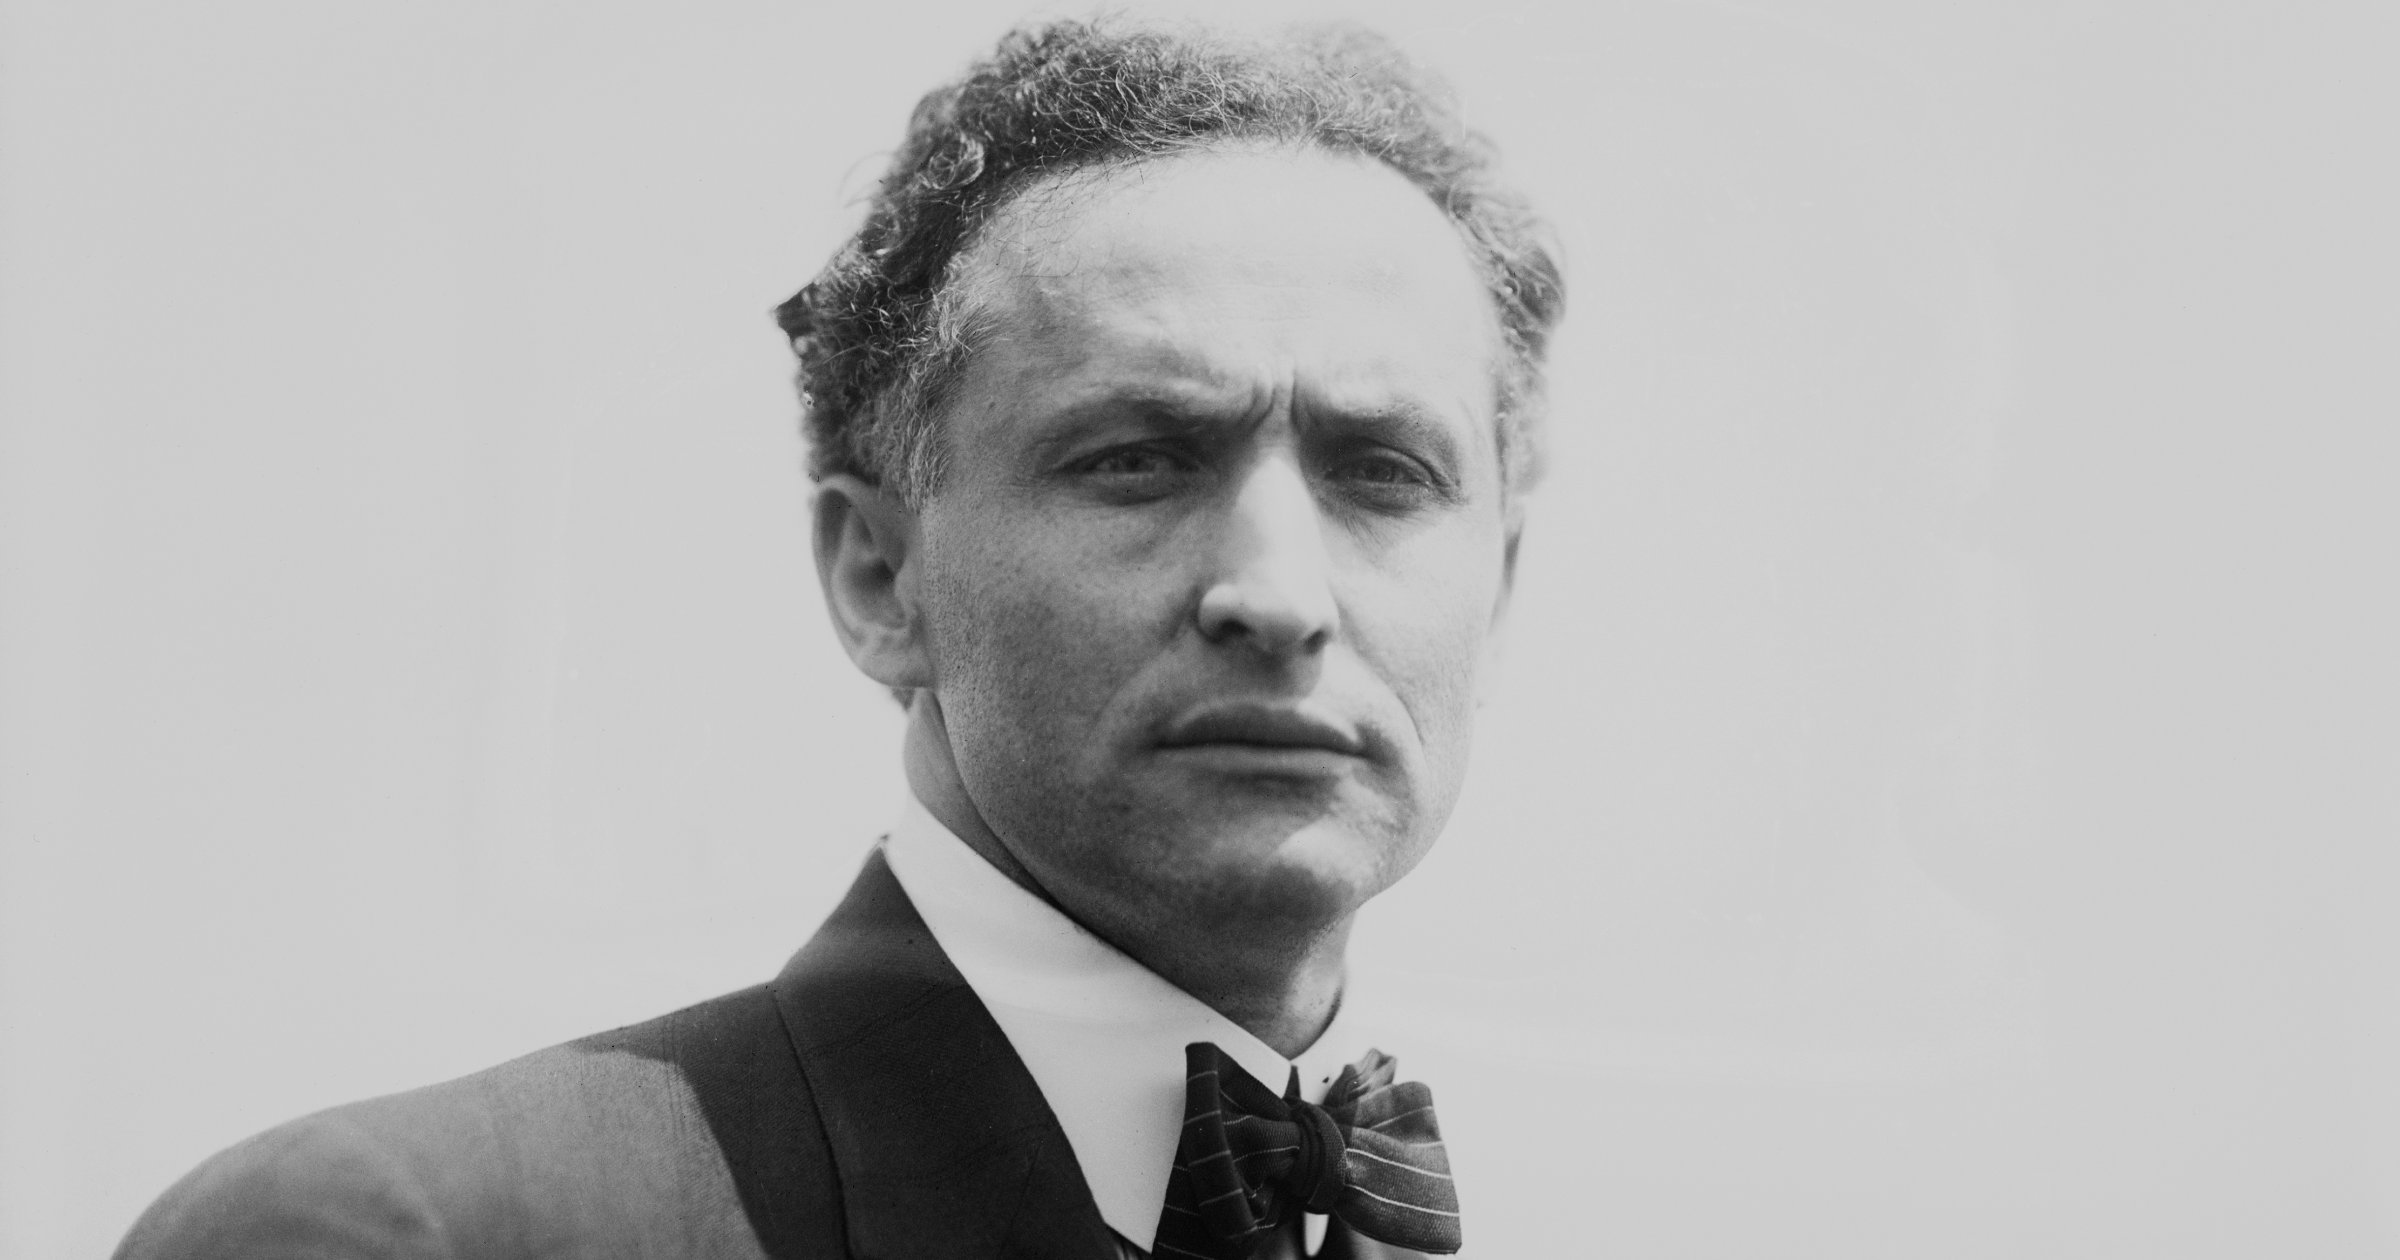 Illusionist and escape artist Harry Houdini in New York City on July 7, 1912. That same day he performed his famous stunt in which he was submerged in the East River in a crate and escaped in just under a minute.